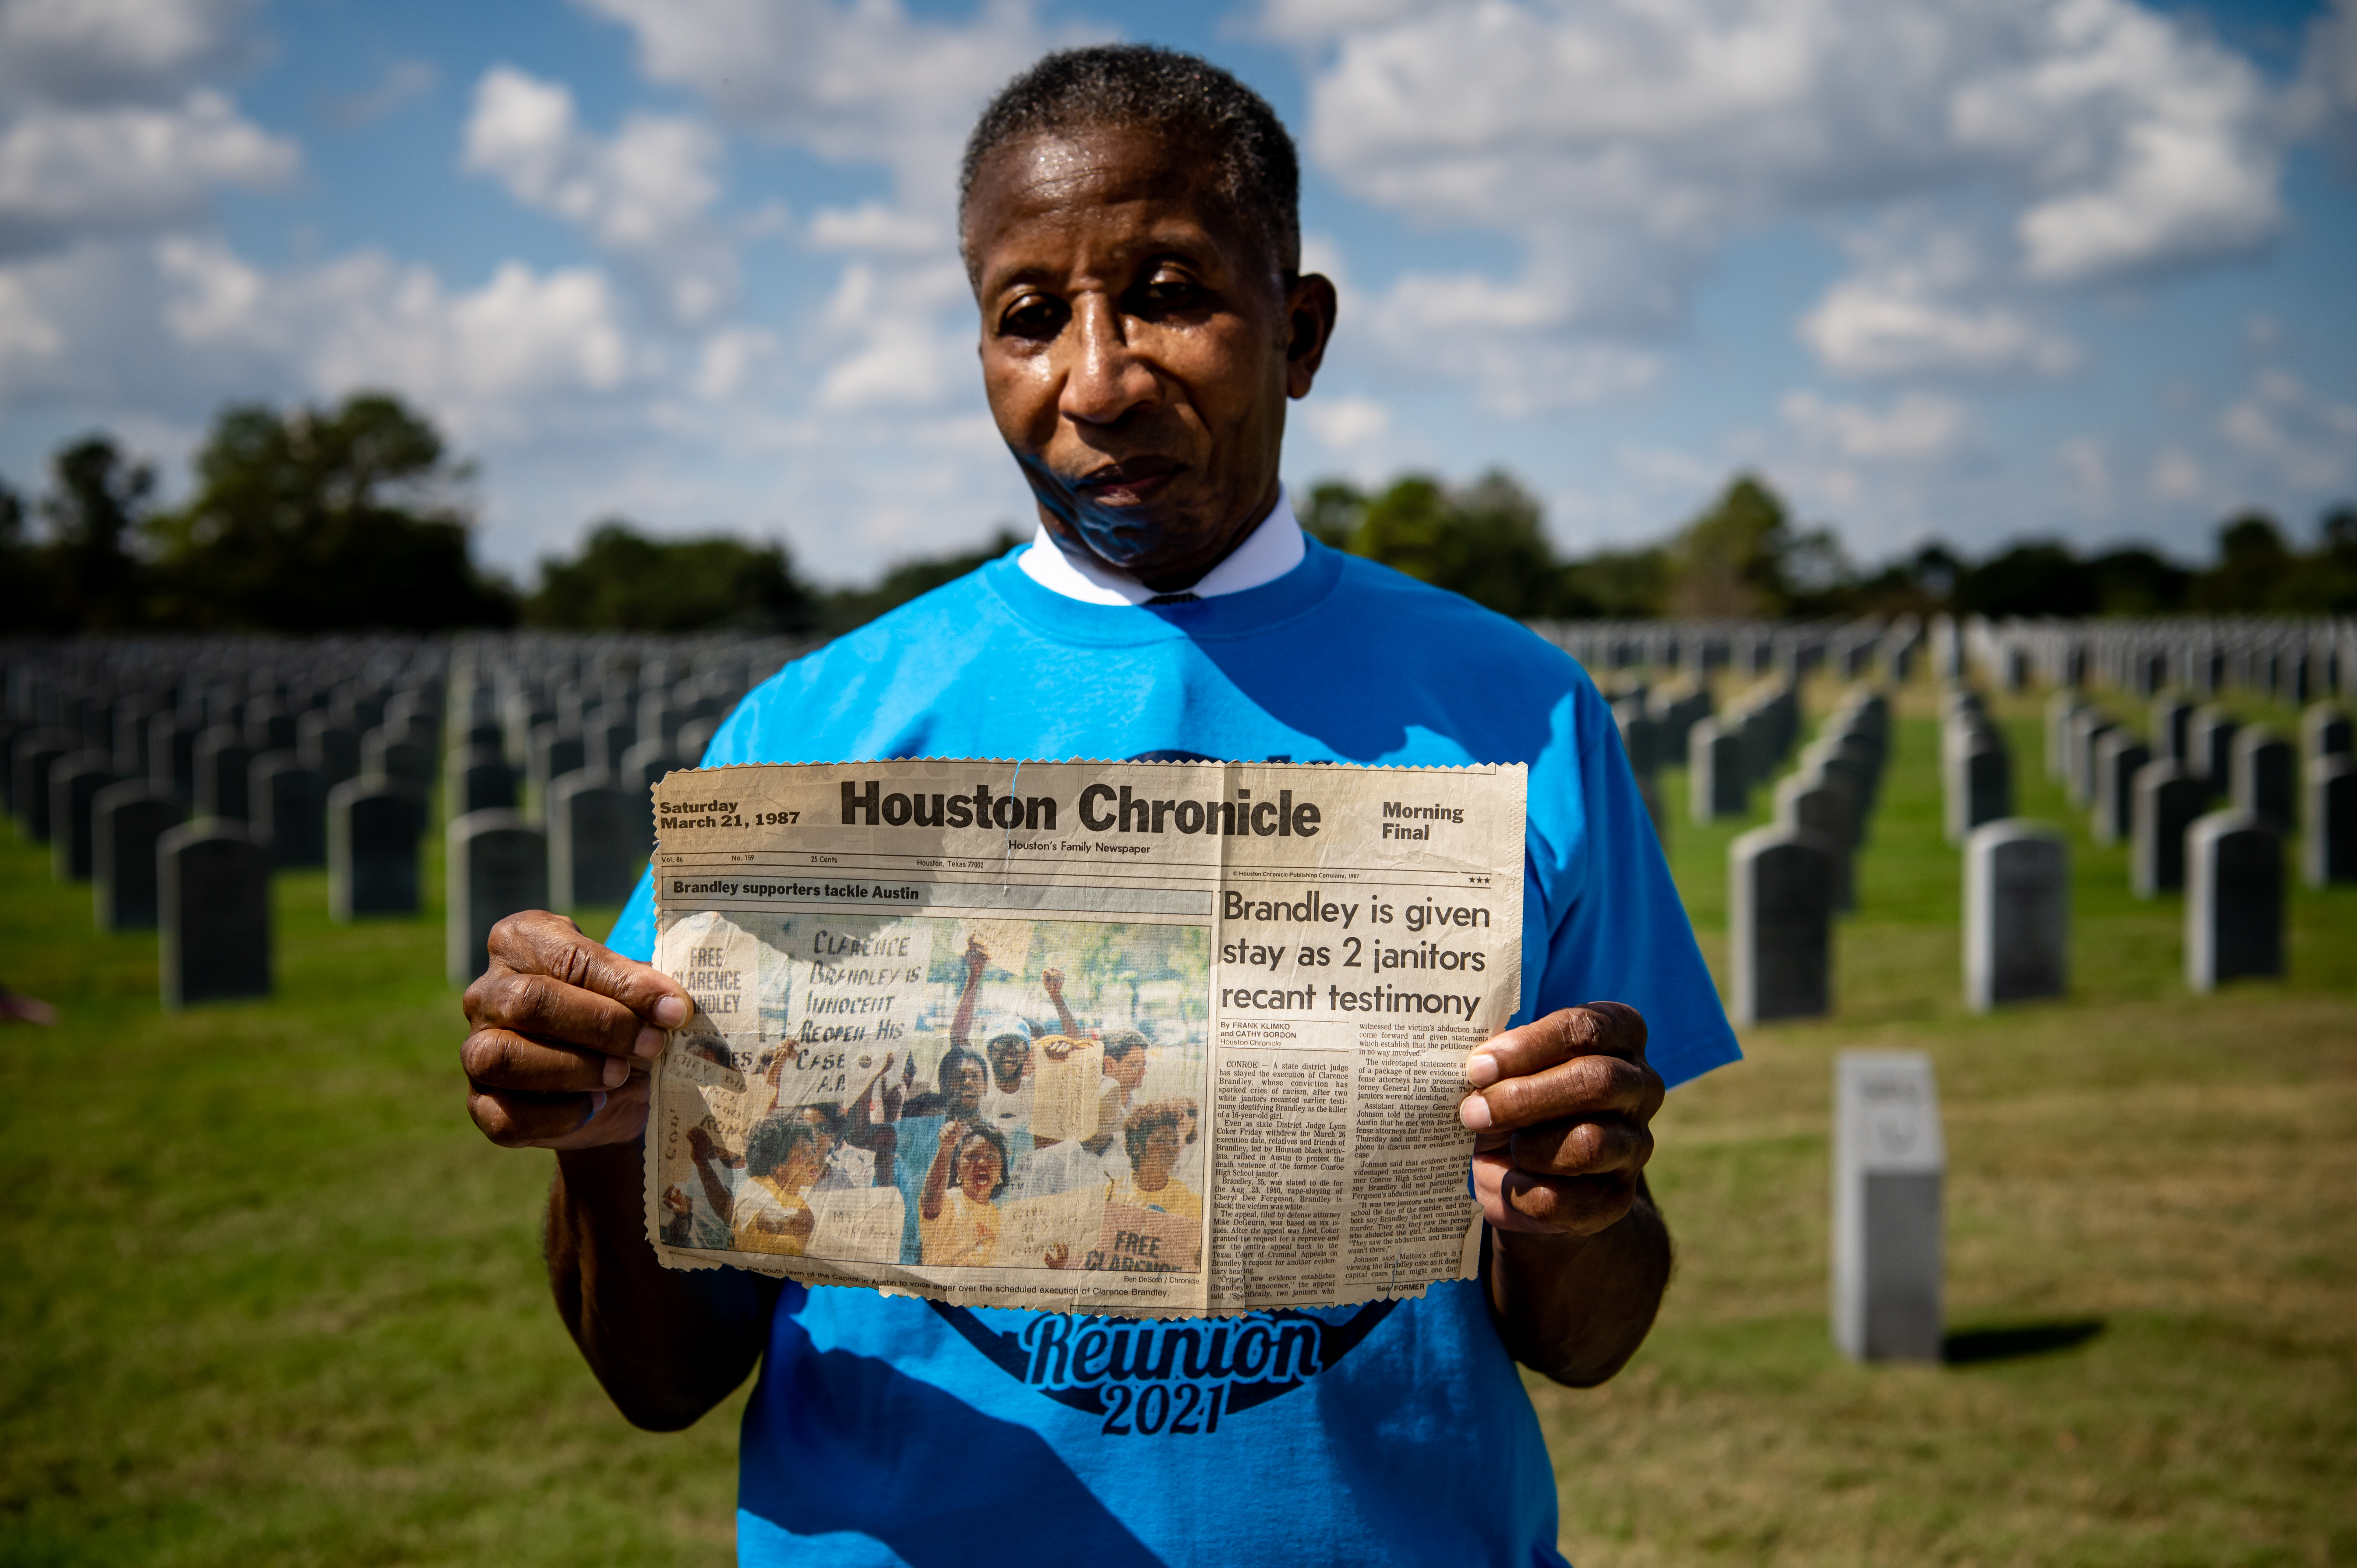 An older Black man, standing in a sunlit cemetery, holds up a newspaper clipping which reads "Brandley is given stay as 2 janitors recant testimony."